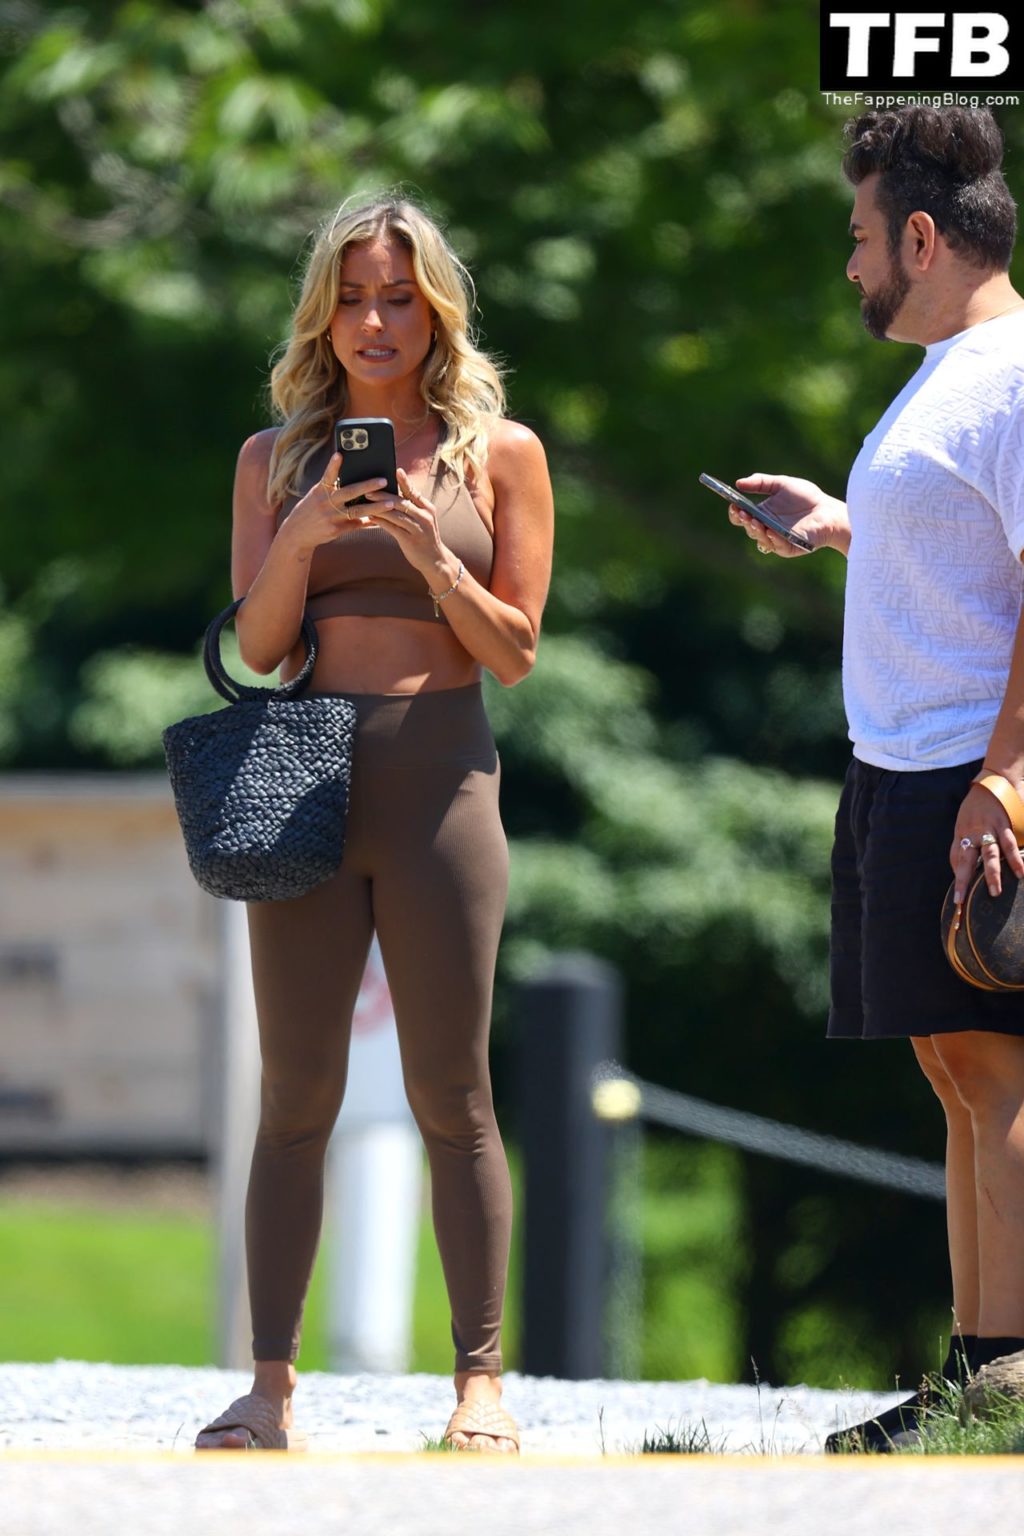 Kristin Cavallari Sexy The Fappening Blog 40 1 1024x1536 - Kristin Cavallari Shows Off Her Abs While Wearing a Brown Athleisure Outfit in East Hampton (47 Photos)